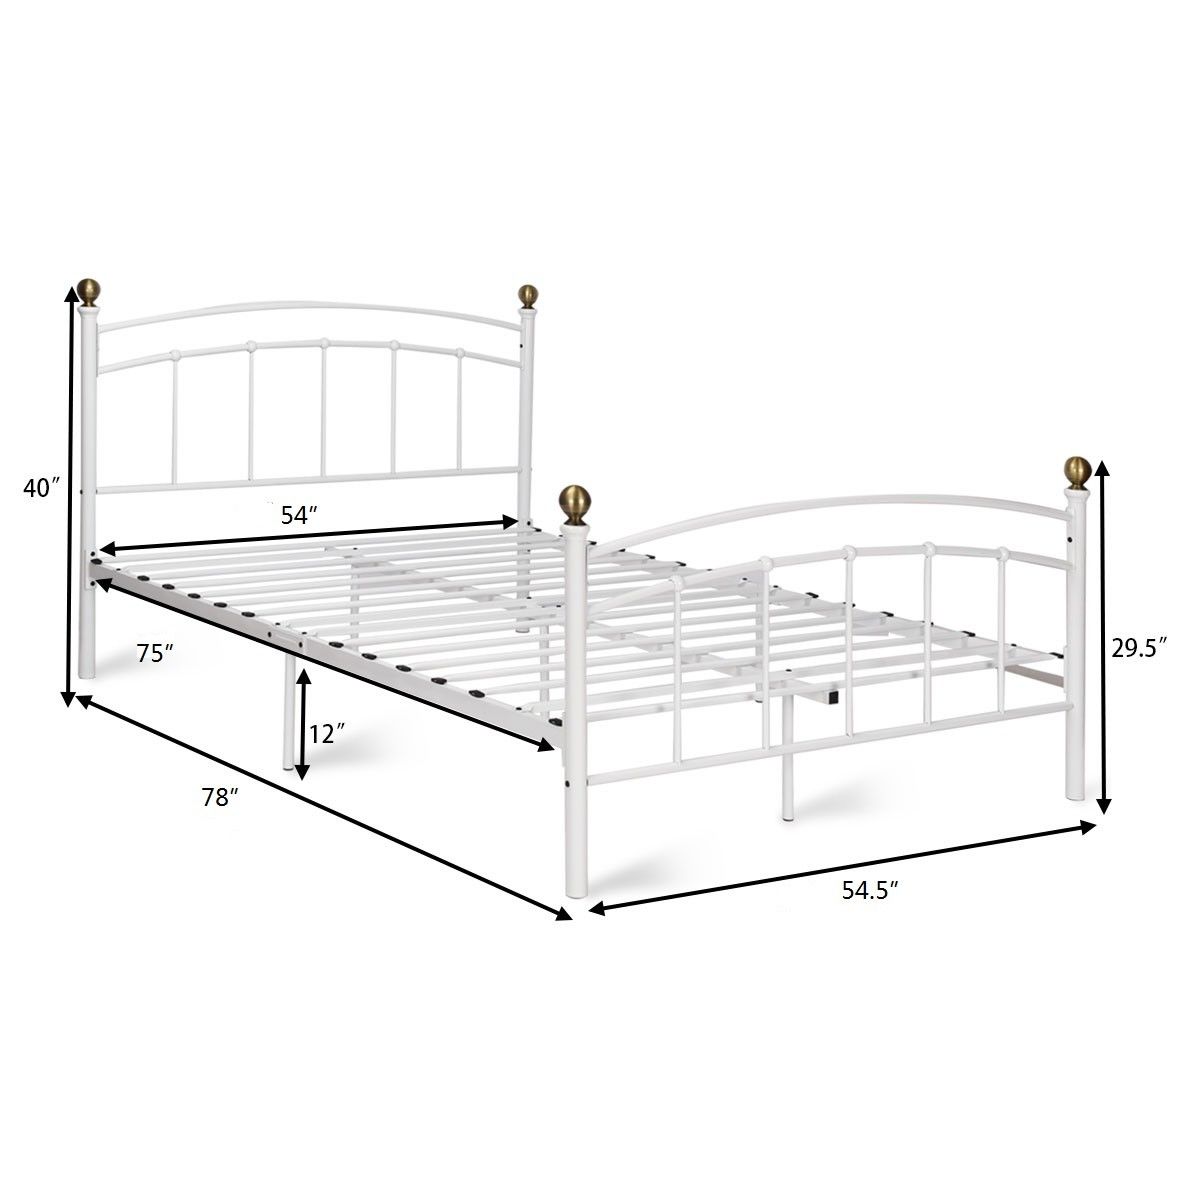 Gymax 12 Full Size Metal Bed Frame, Full Size Metal Bed Frame With Headboard And Footboard